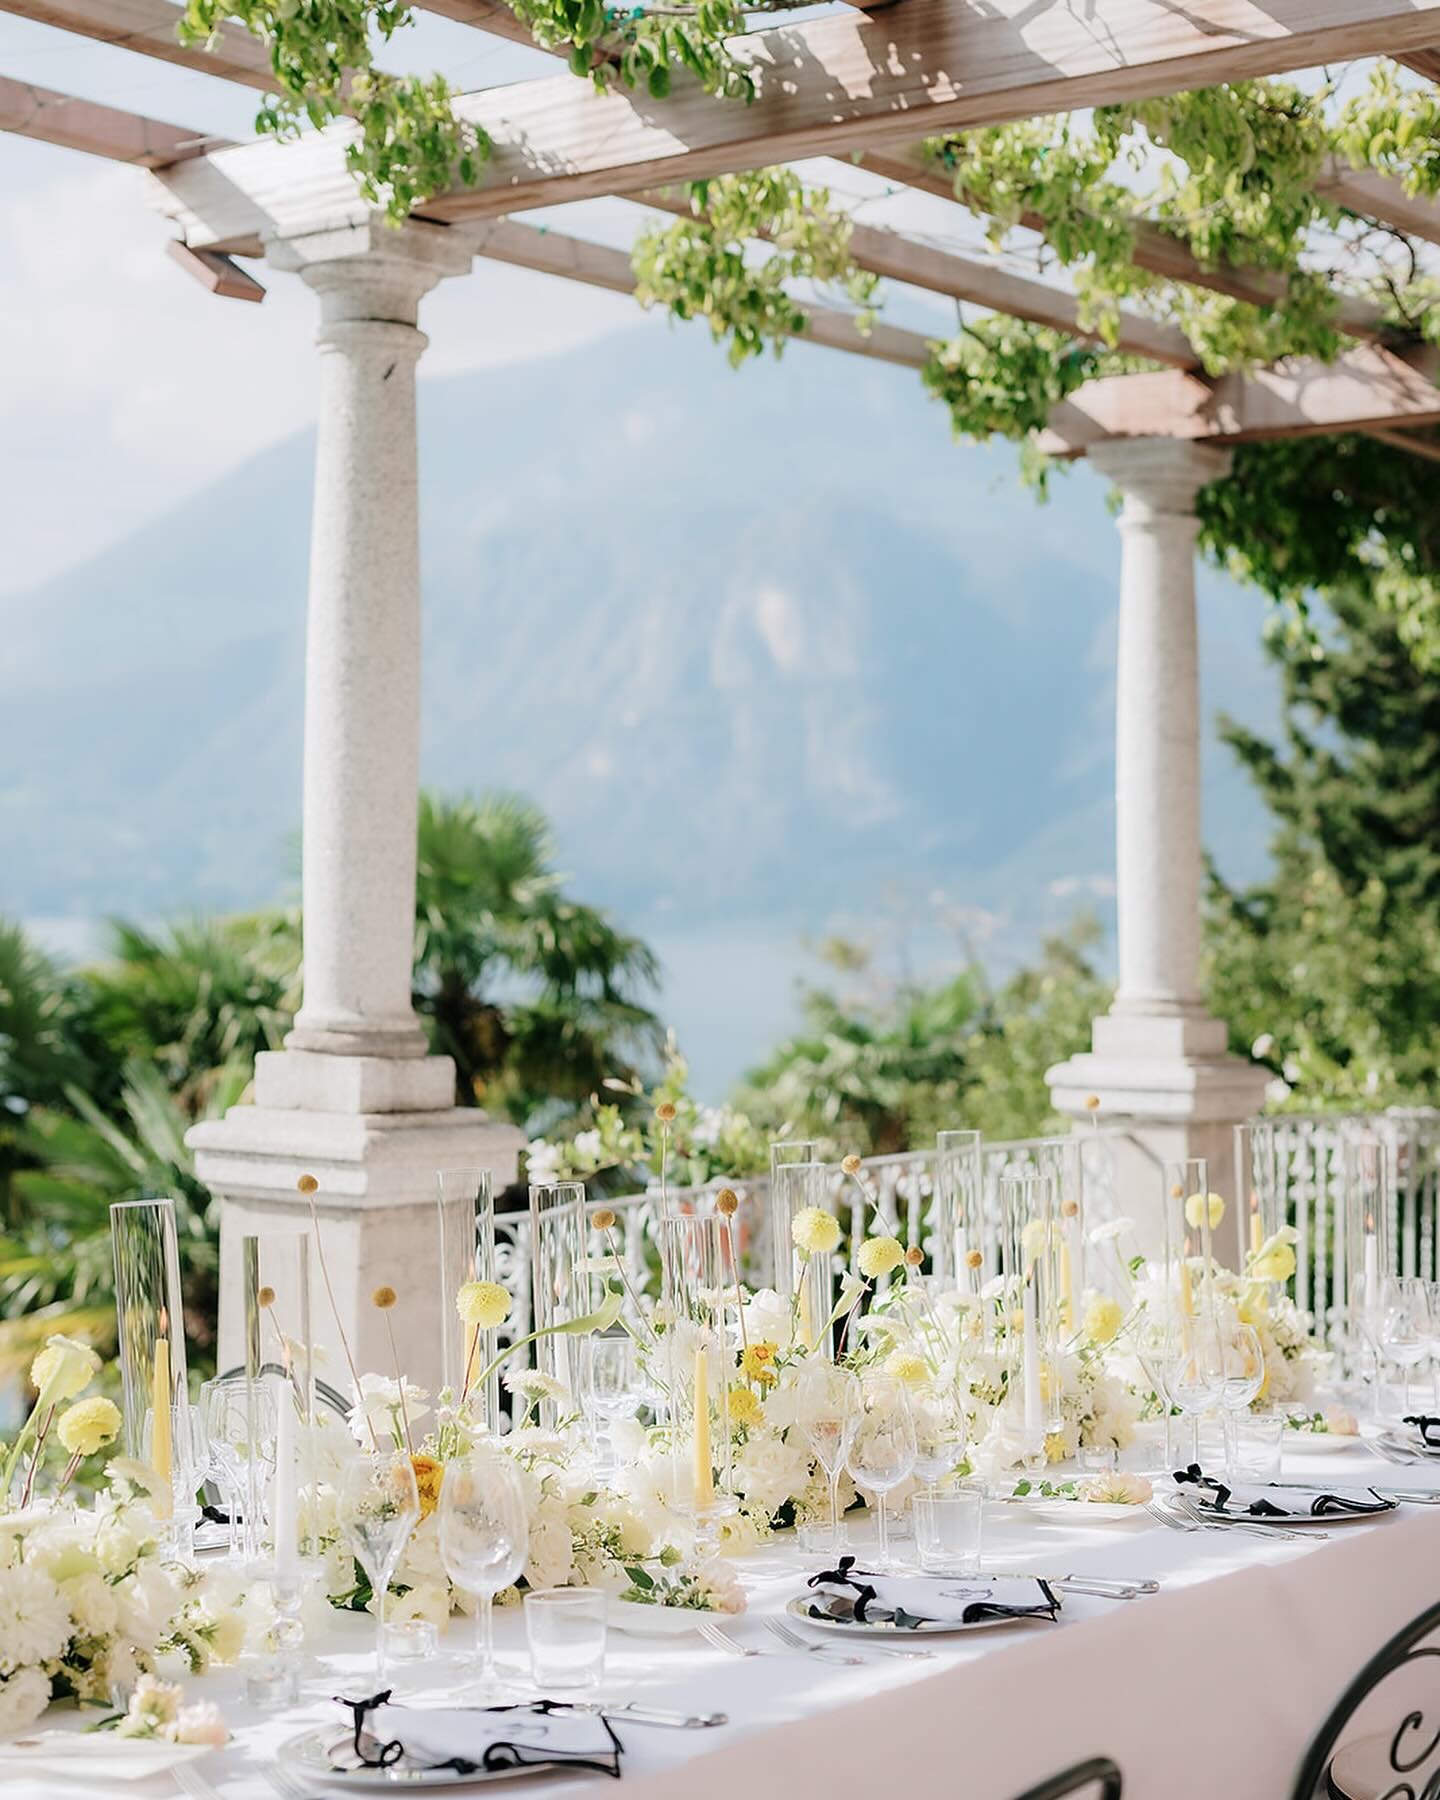 Nothing says summer like alfresco dining and today&rsquo;s the perfect day for it&mdash;at last! 

Editorial for @wed_vibes
Planner &amp; designer
@roberta_burcheri_events
Photographer @gianniaiazzi_photographer
Florals design @dellabellafiori
Videog